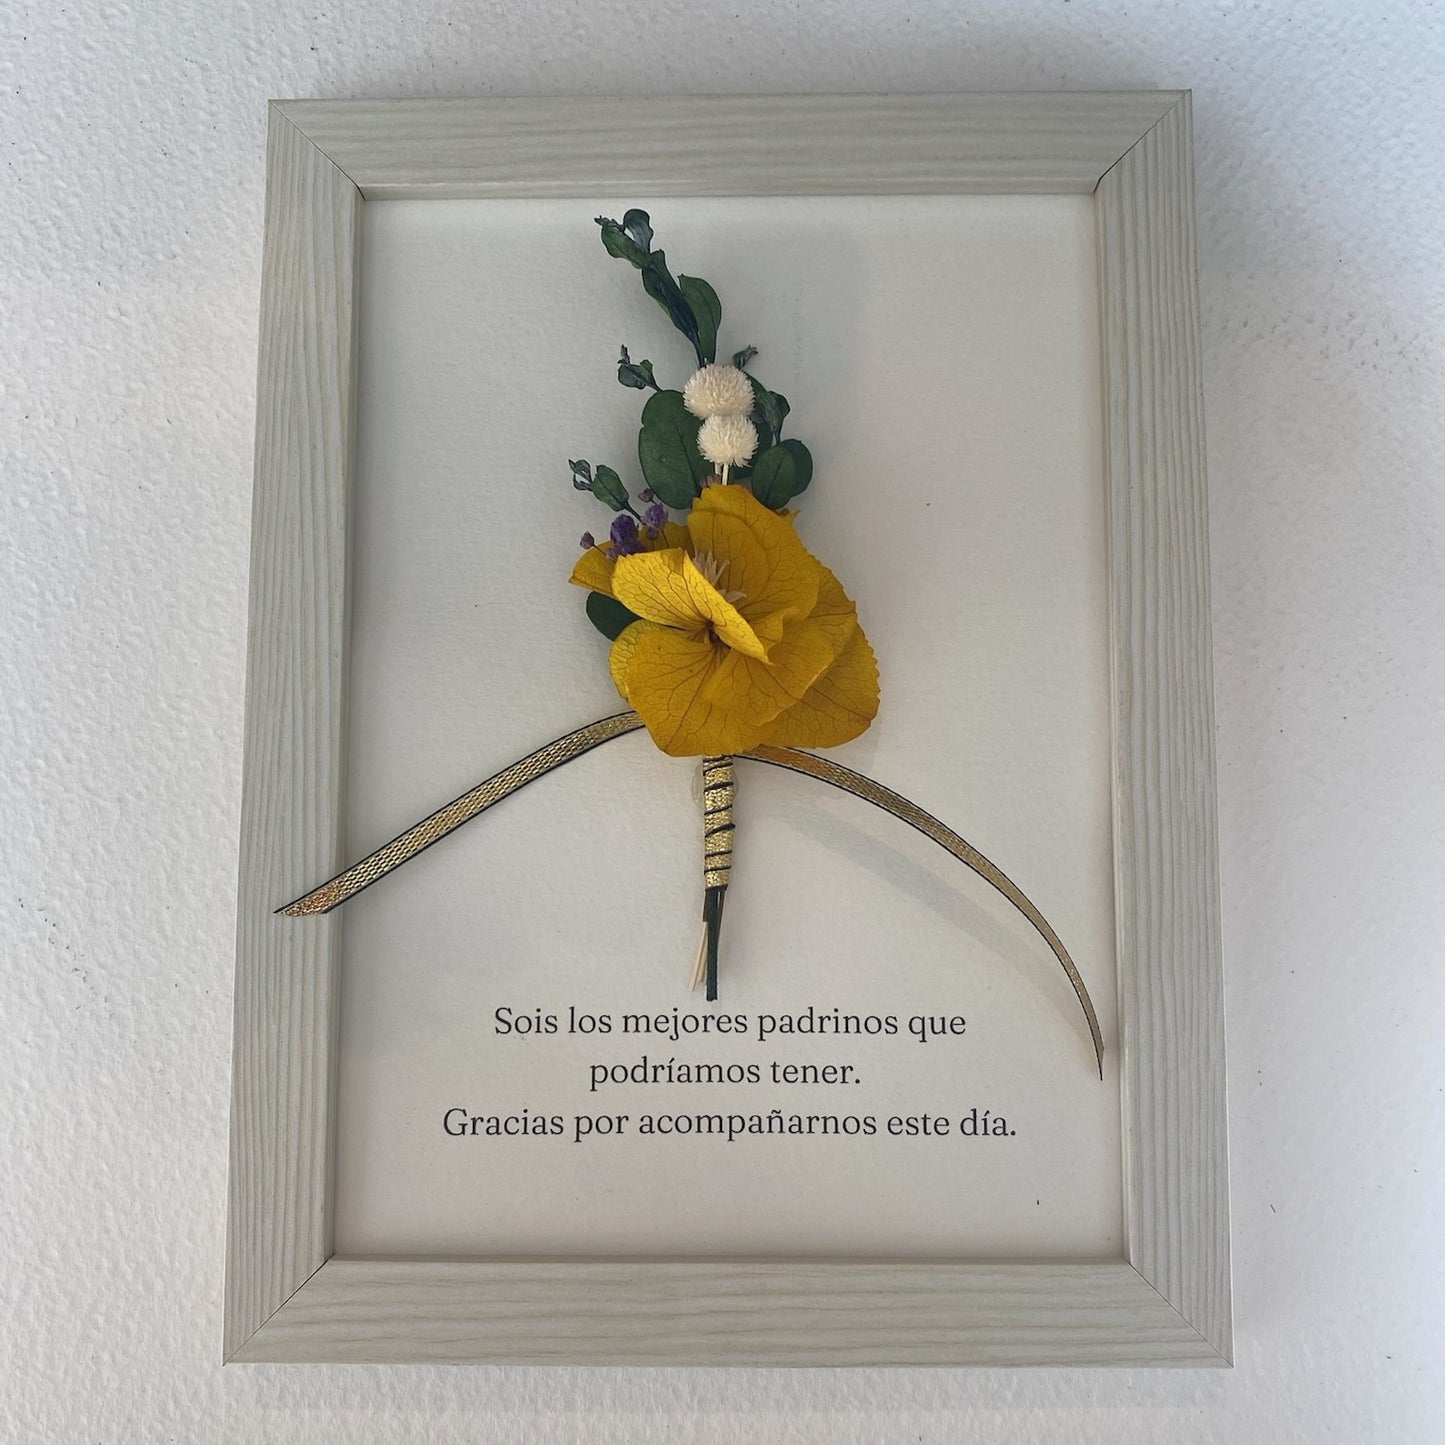 Frame with preserved bouquet and personalized message